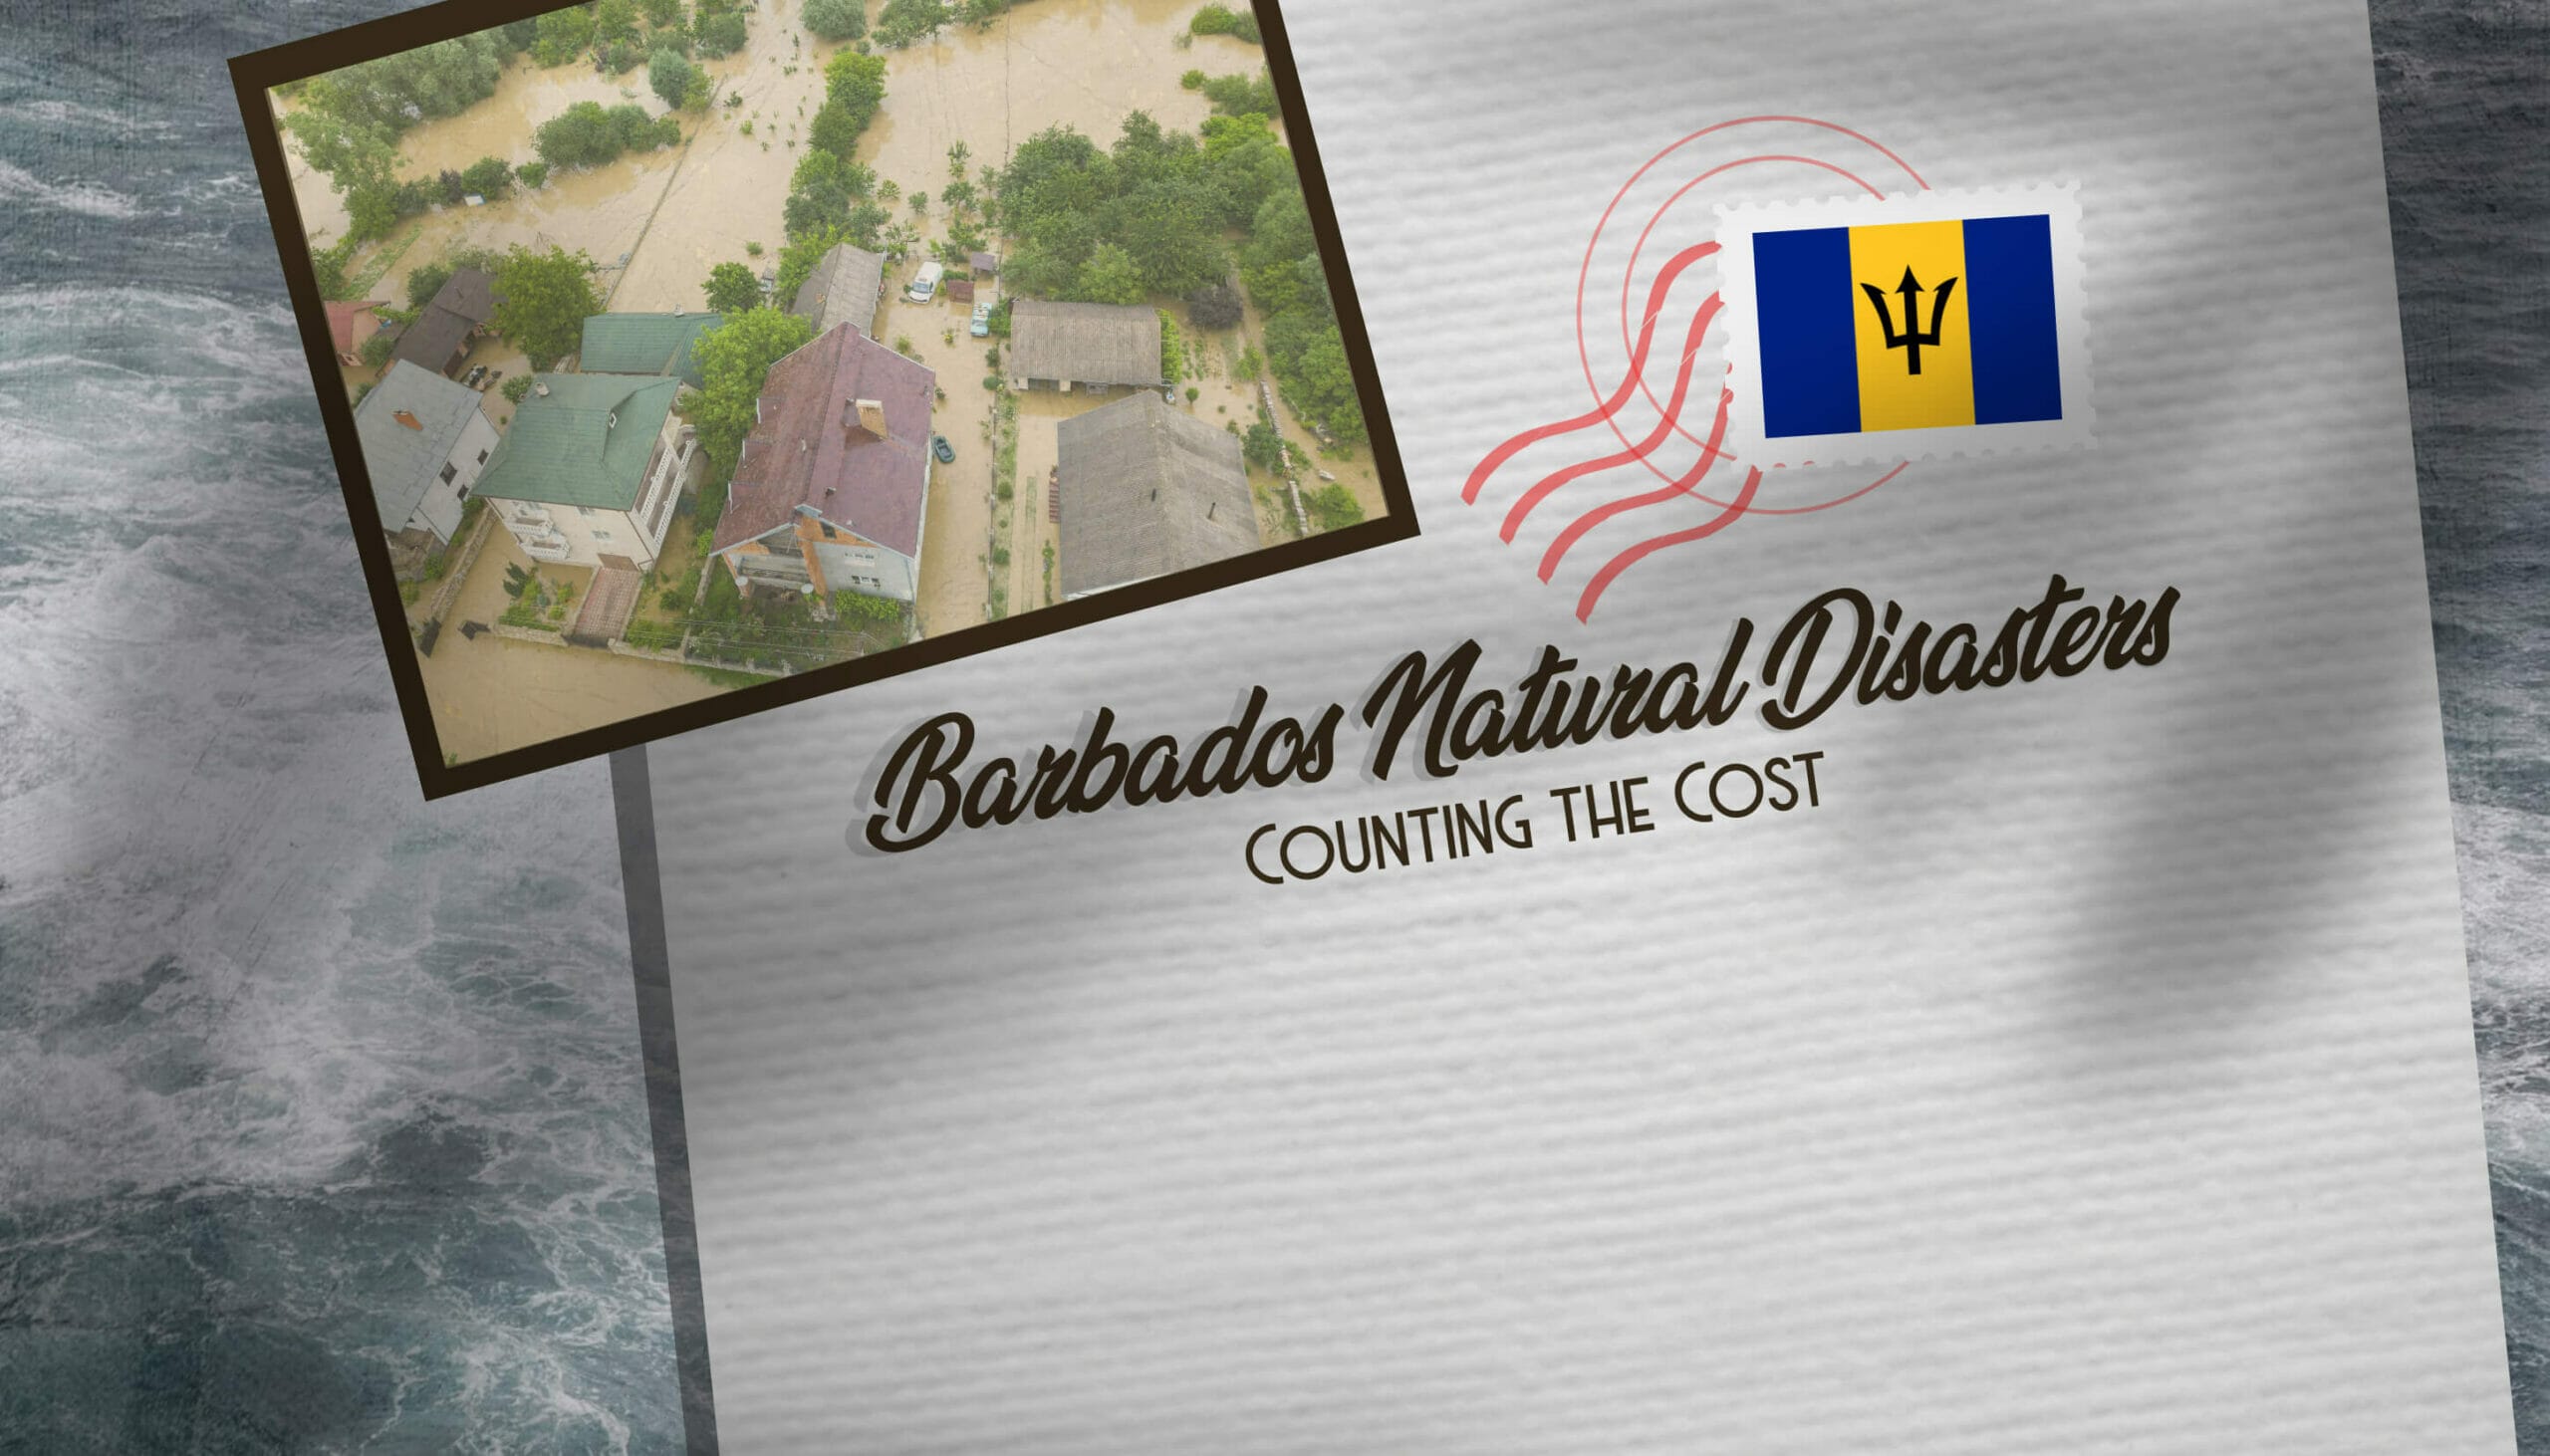 Barbados Natural Disasters Counting the Cost